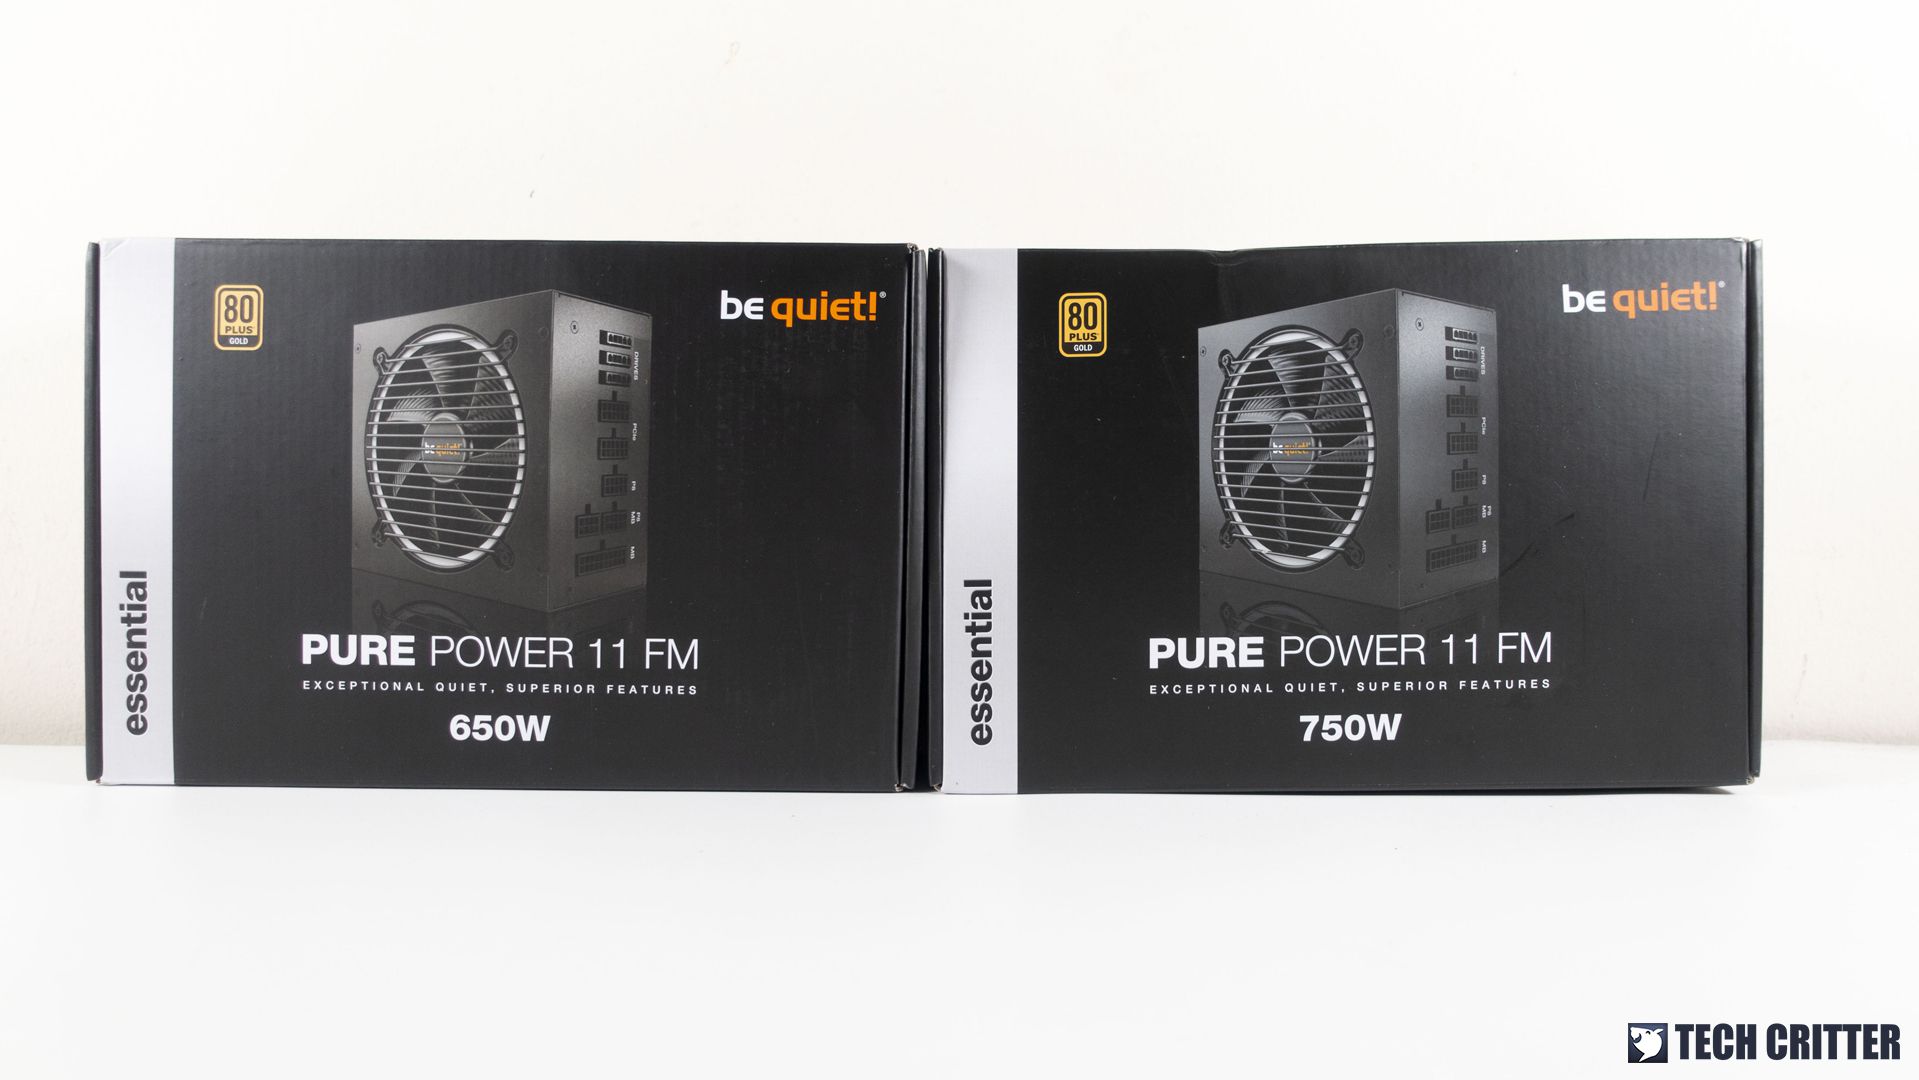 be quiet! Pure Power 11 FM 650W & 750W Overview